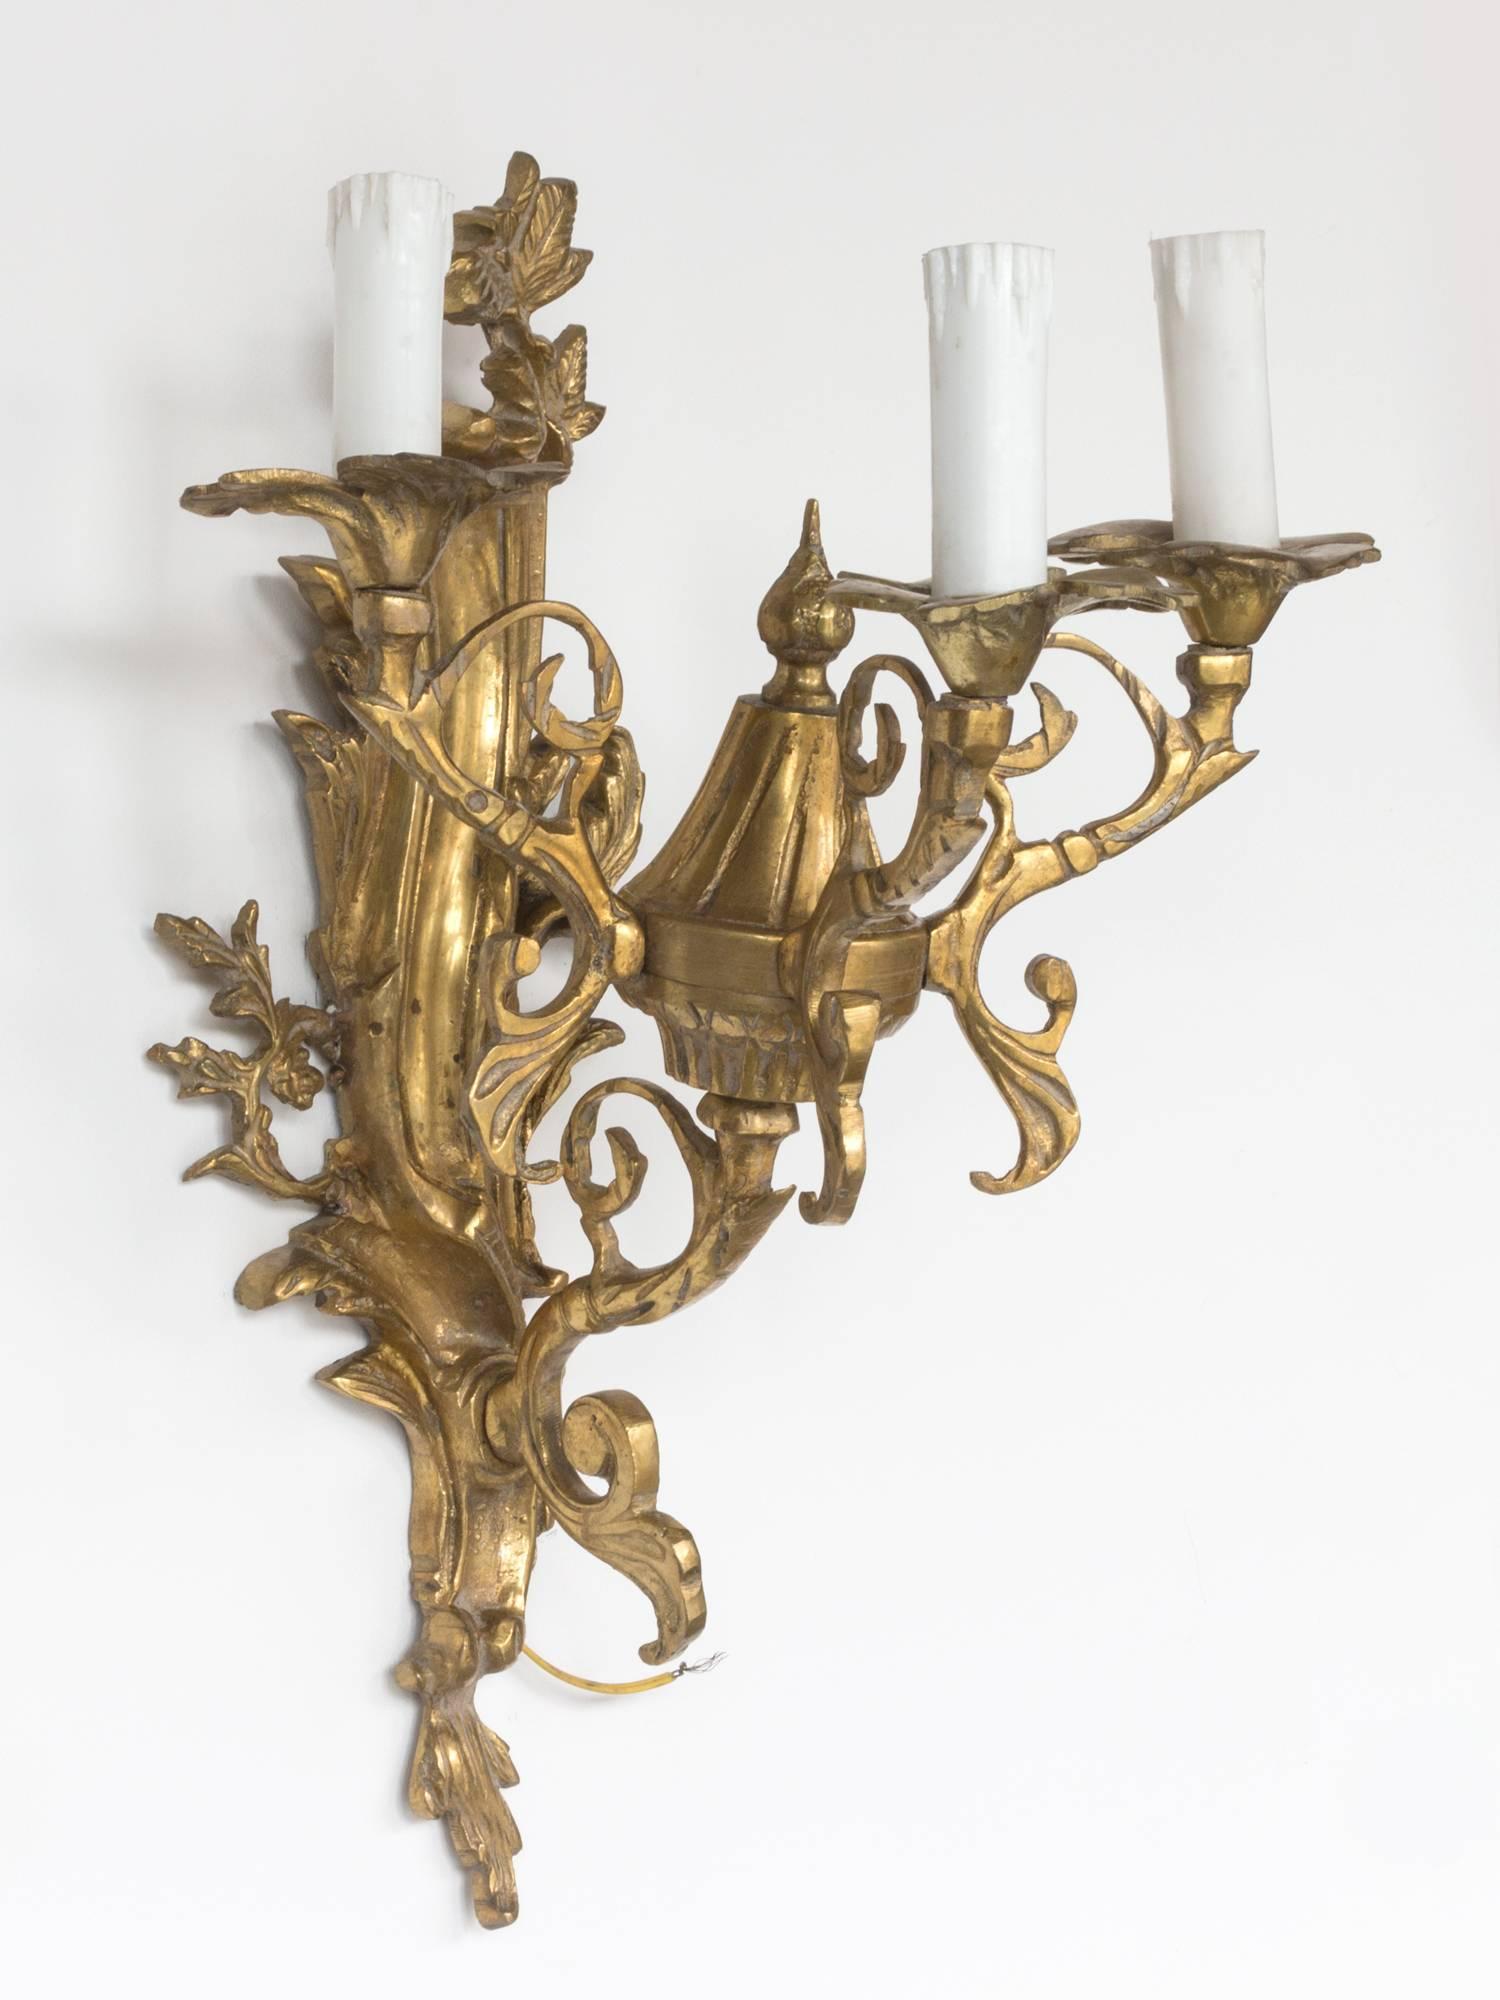 19th century gilded bronze French wall sconces.

Ornate Louis XVI style wall lights from the late 19th century (circa 1890s) from an apartment in Paris. 

The gilded bronze design features ornamentation of foilage, tassles and bows. The fixtures